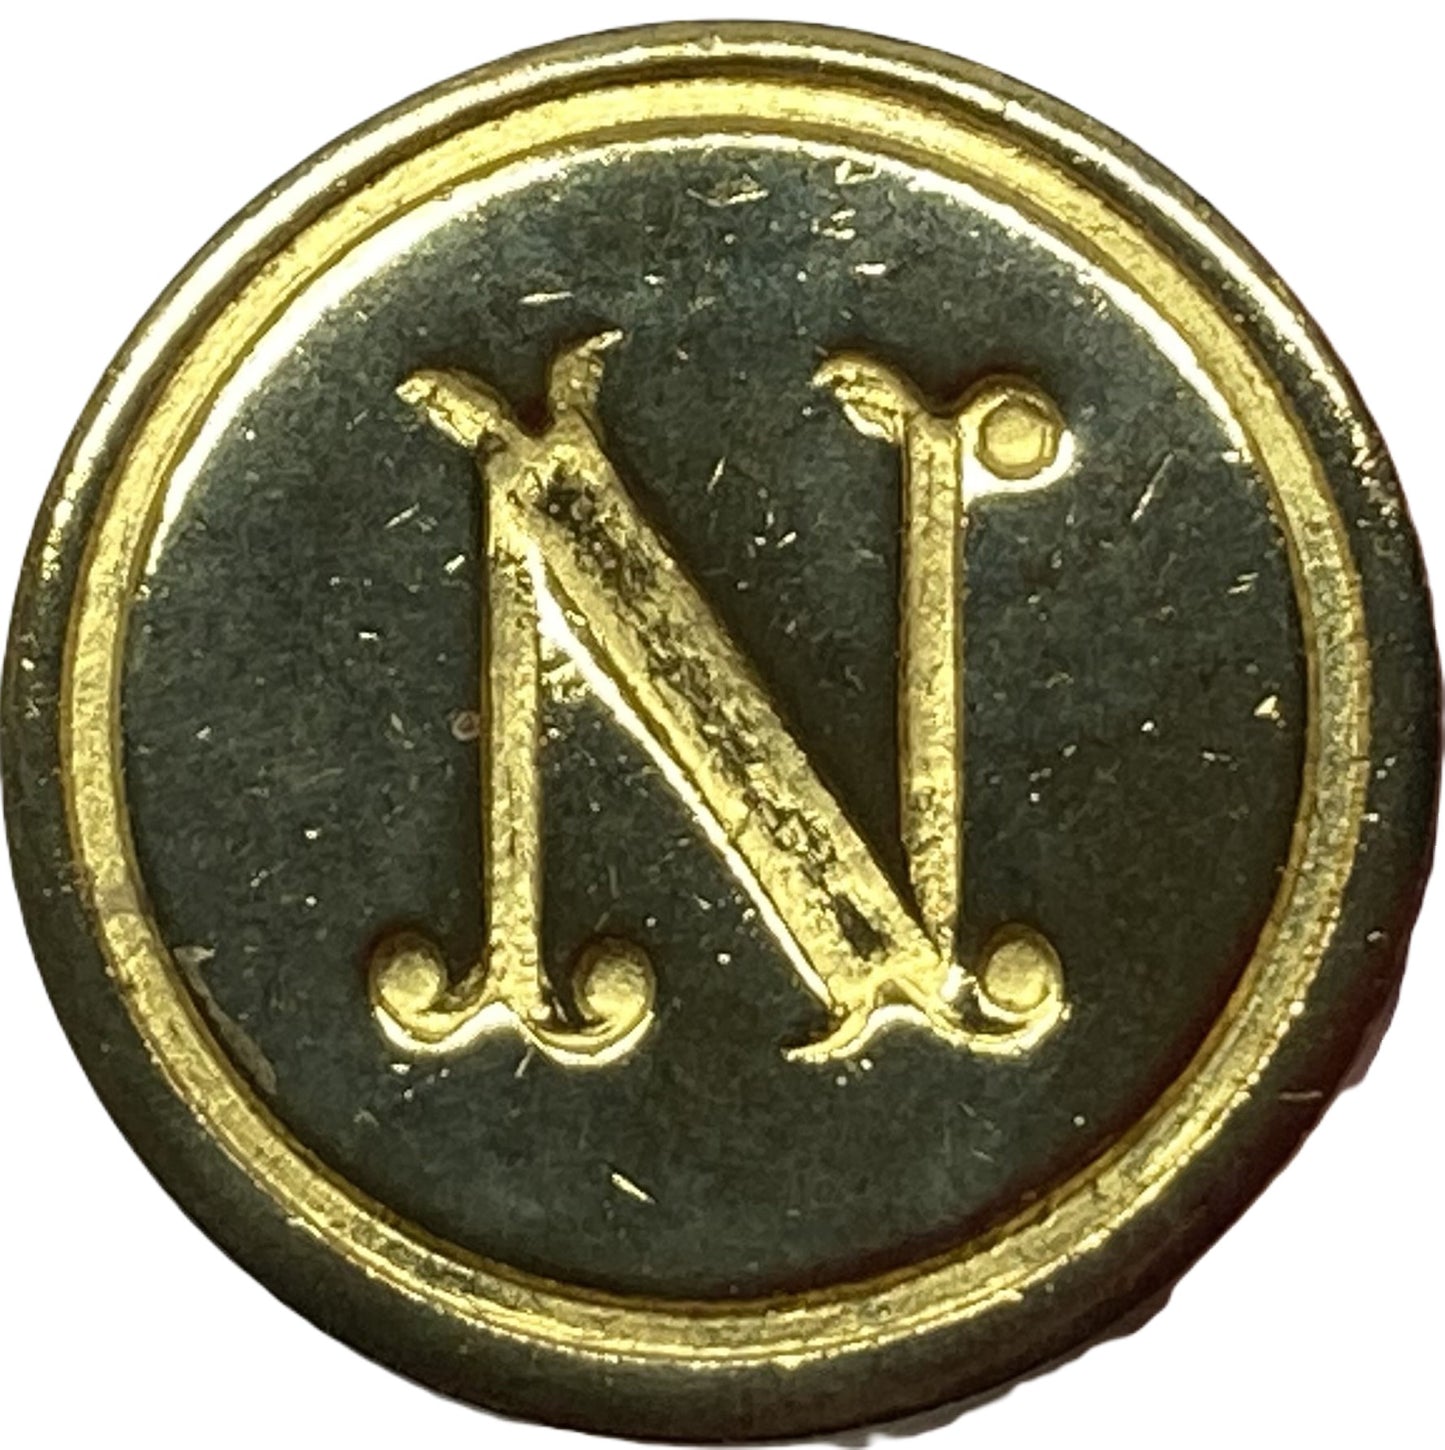 Initial Wax Seal Stamp (3/4" round brass seal & handle, may be imperfect)